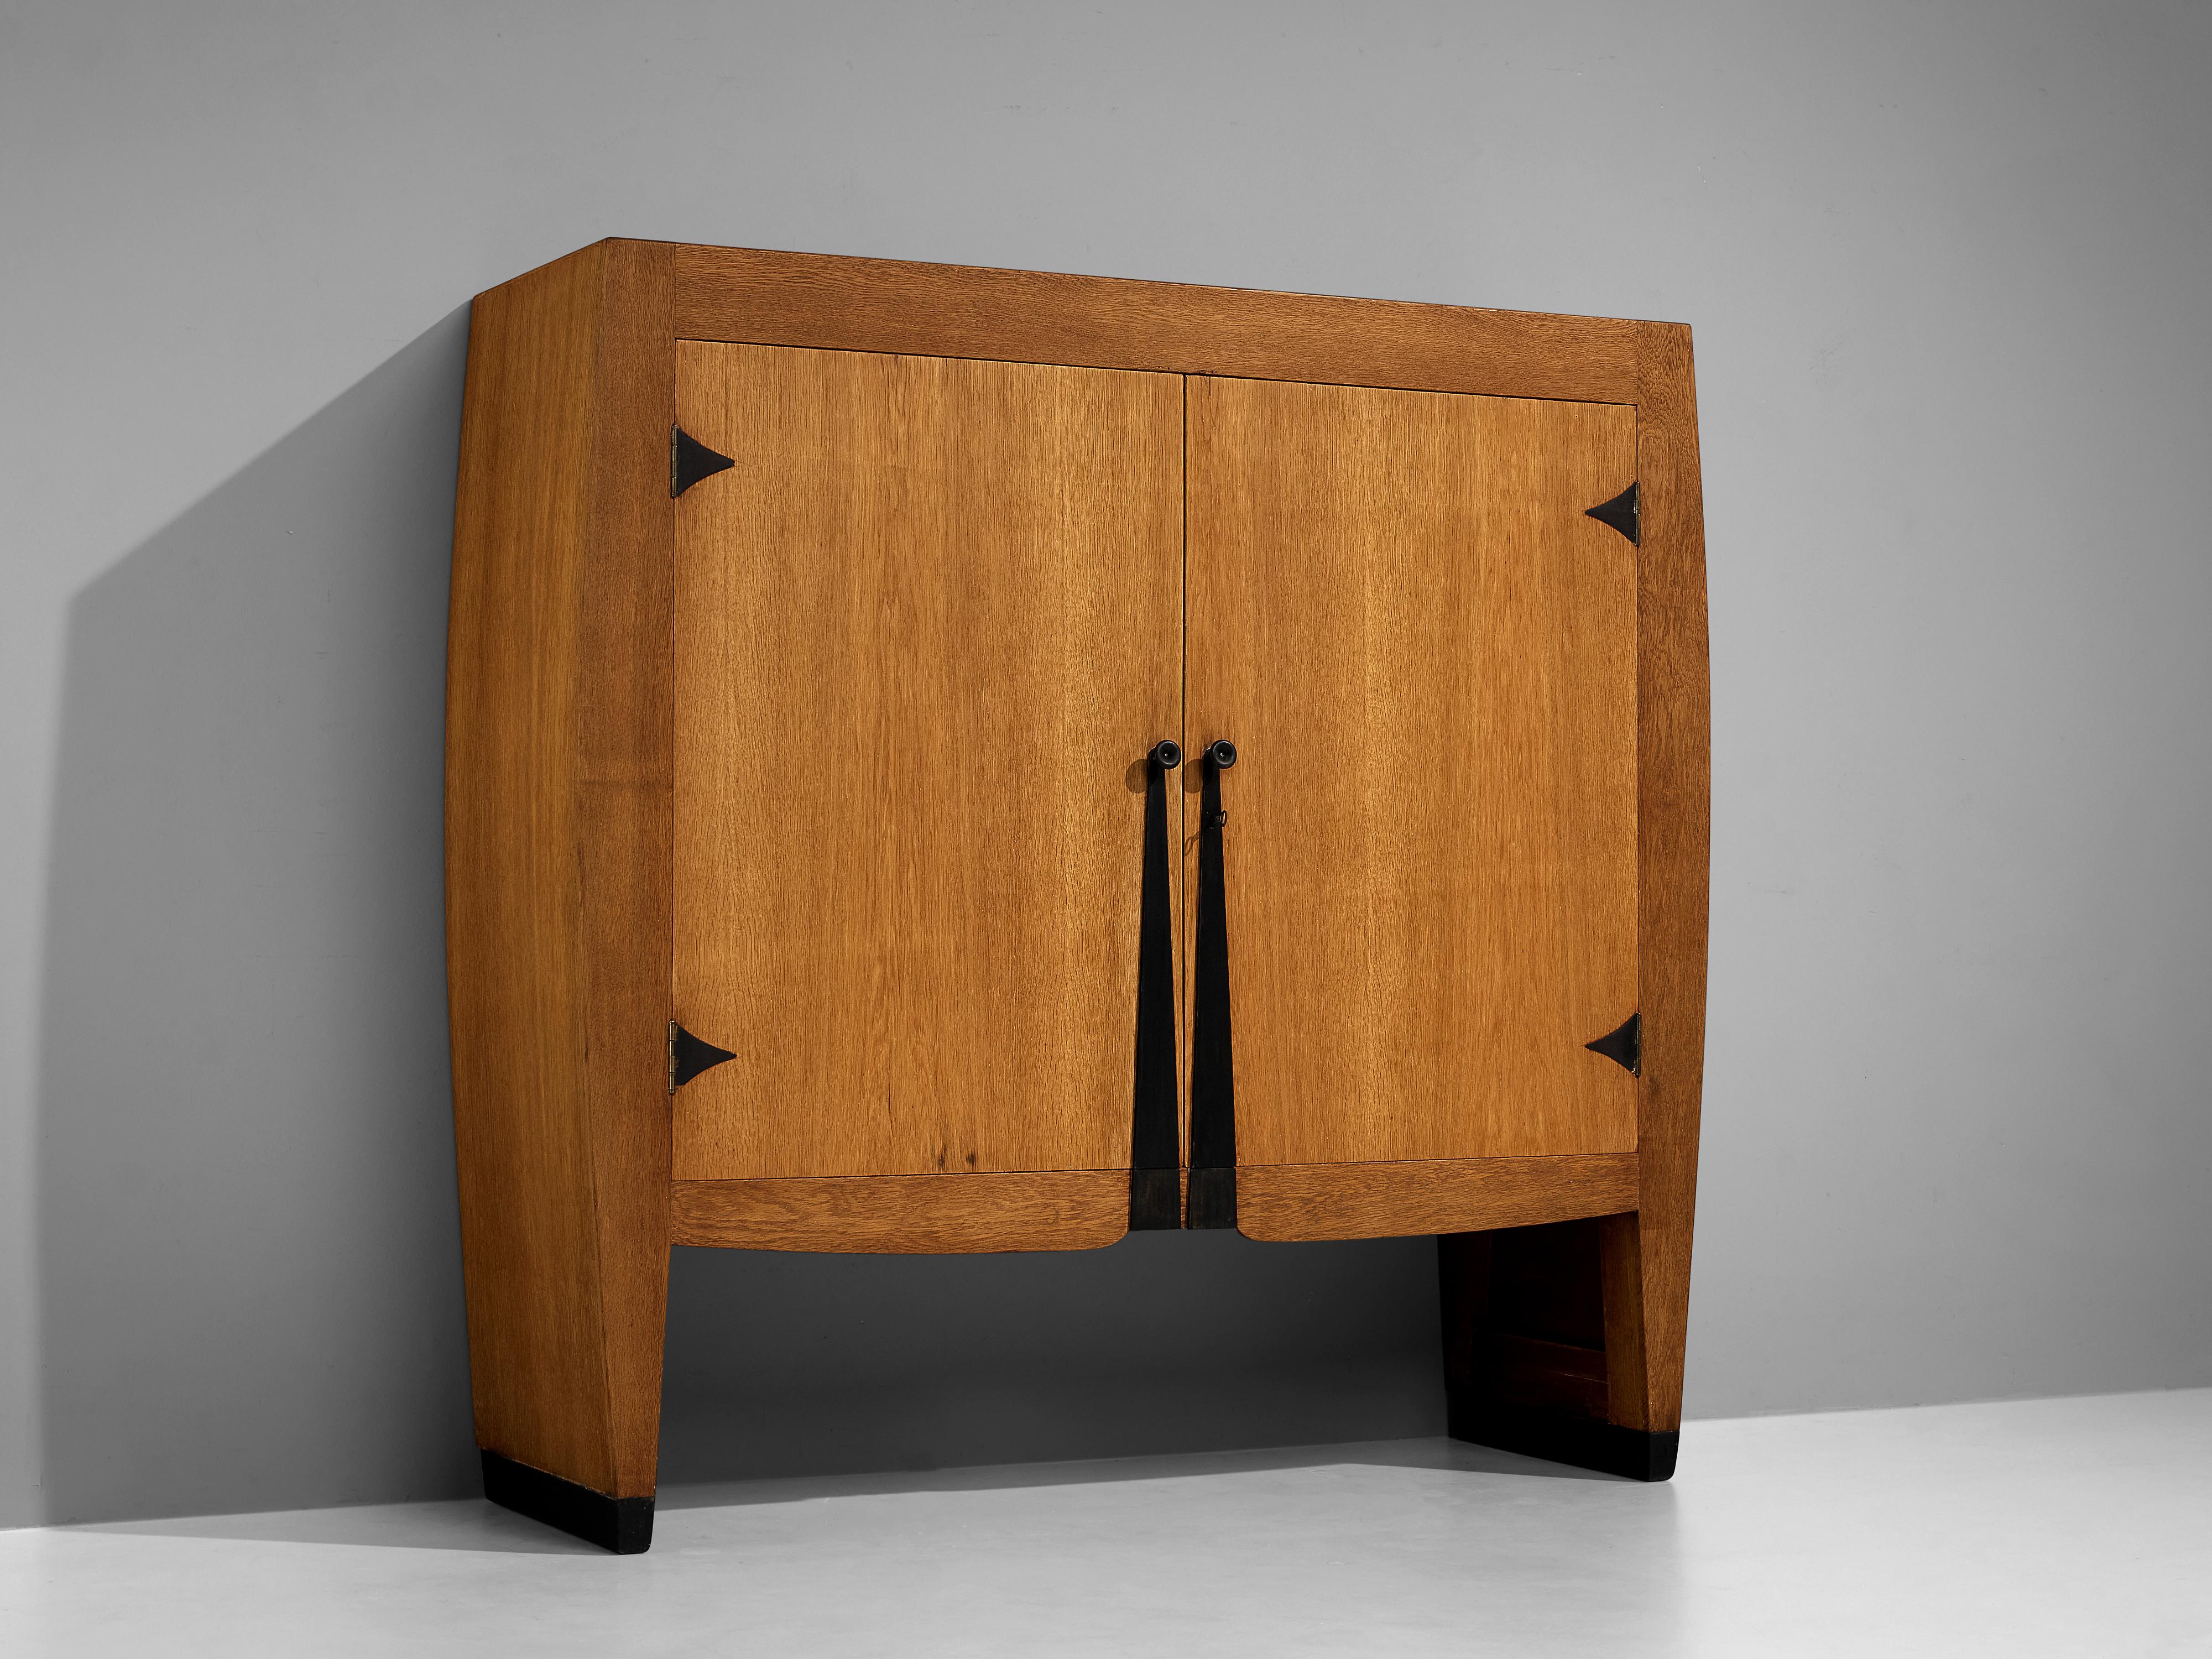 Piet Kramer, cabinet, oak, ebonized wood, Bakelite, metal, The Netherlands, 1920s

Exceptional rare cabinet designed around 1920 by well-known Dutch architect Piet Kramer. The big wardrobe, historically used as a linen cabinet, has beautiful